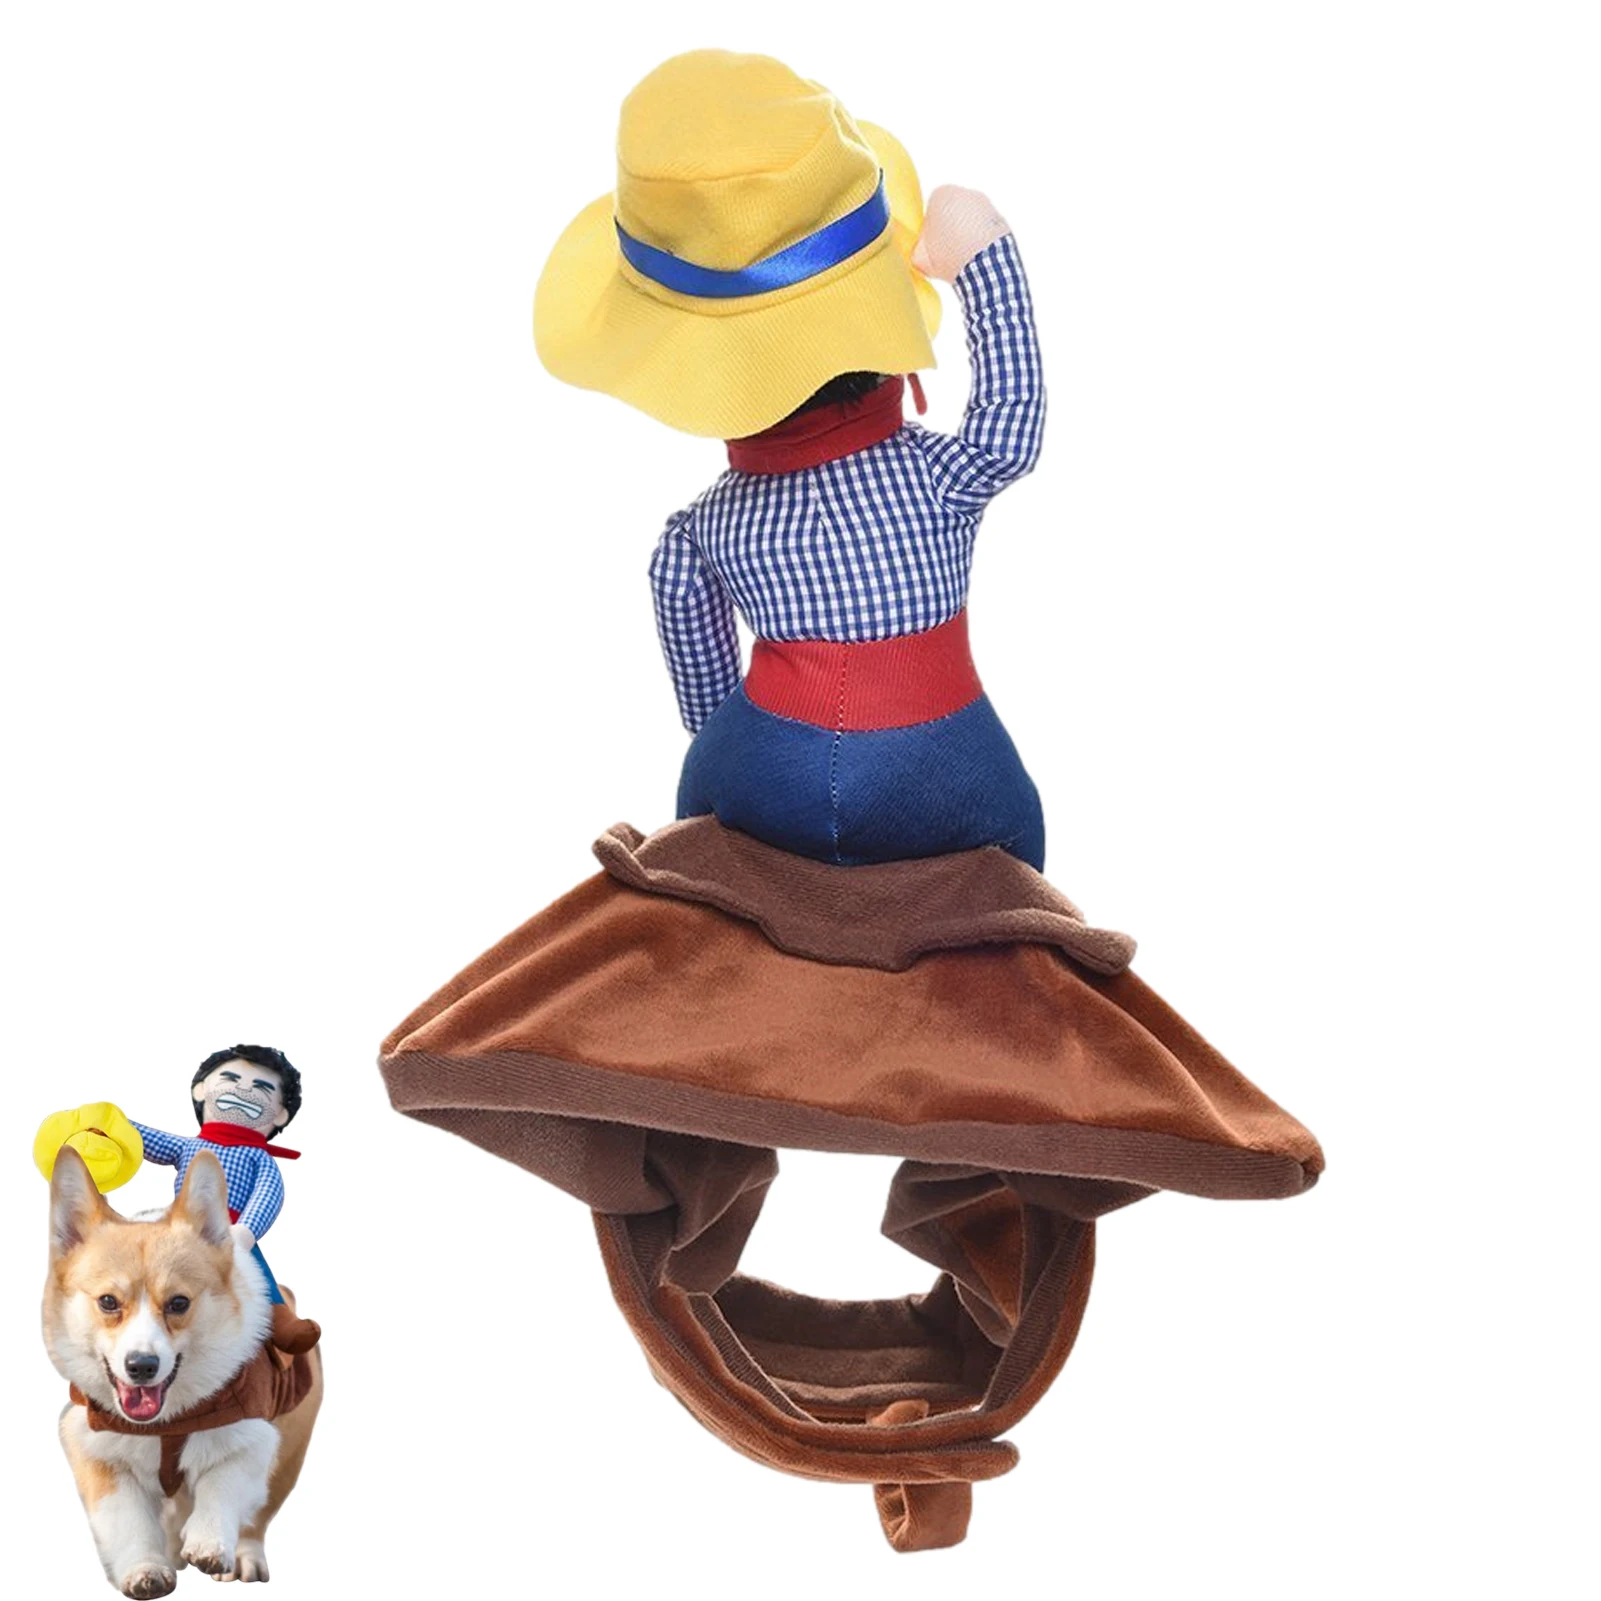 Dog Cowboy Outfit Ventilate Dog Cowboy Costume With Loop Fasteners Dog Halloween Costumes For Pugs Maltese Jack Russell Terrier